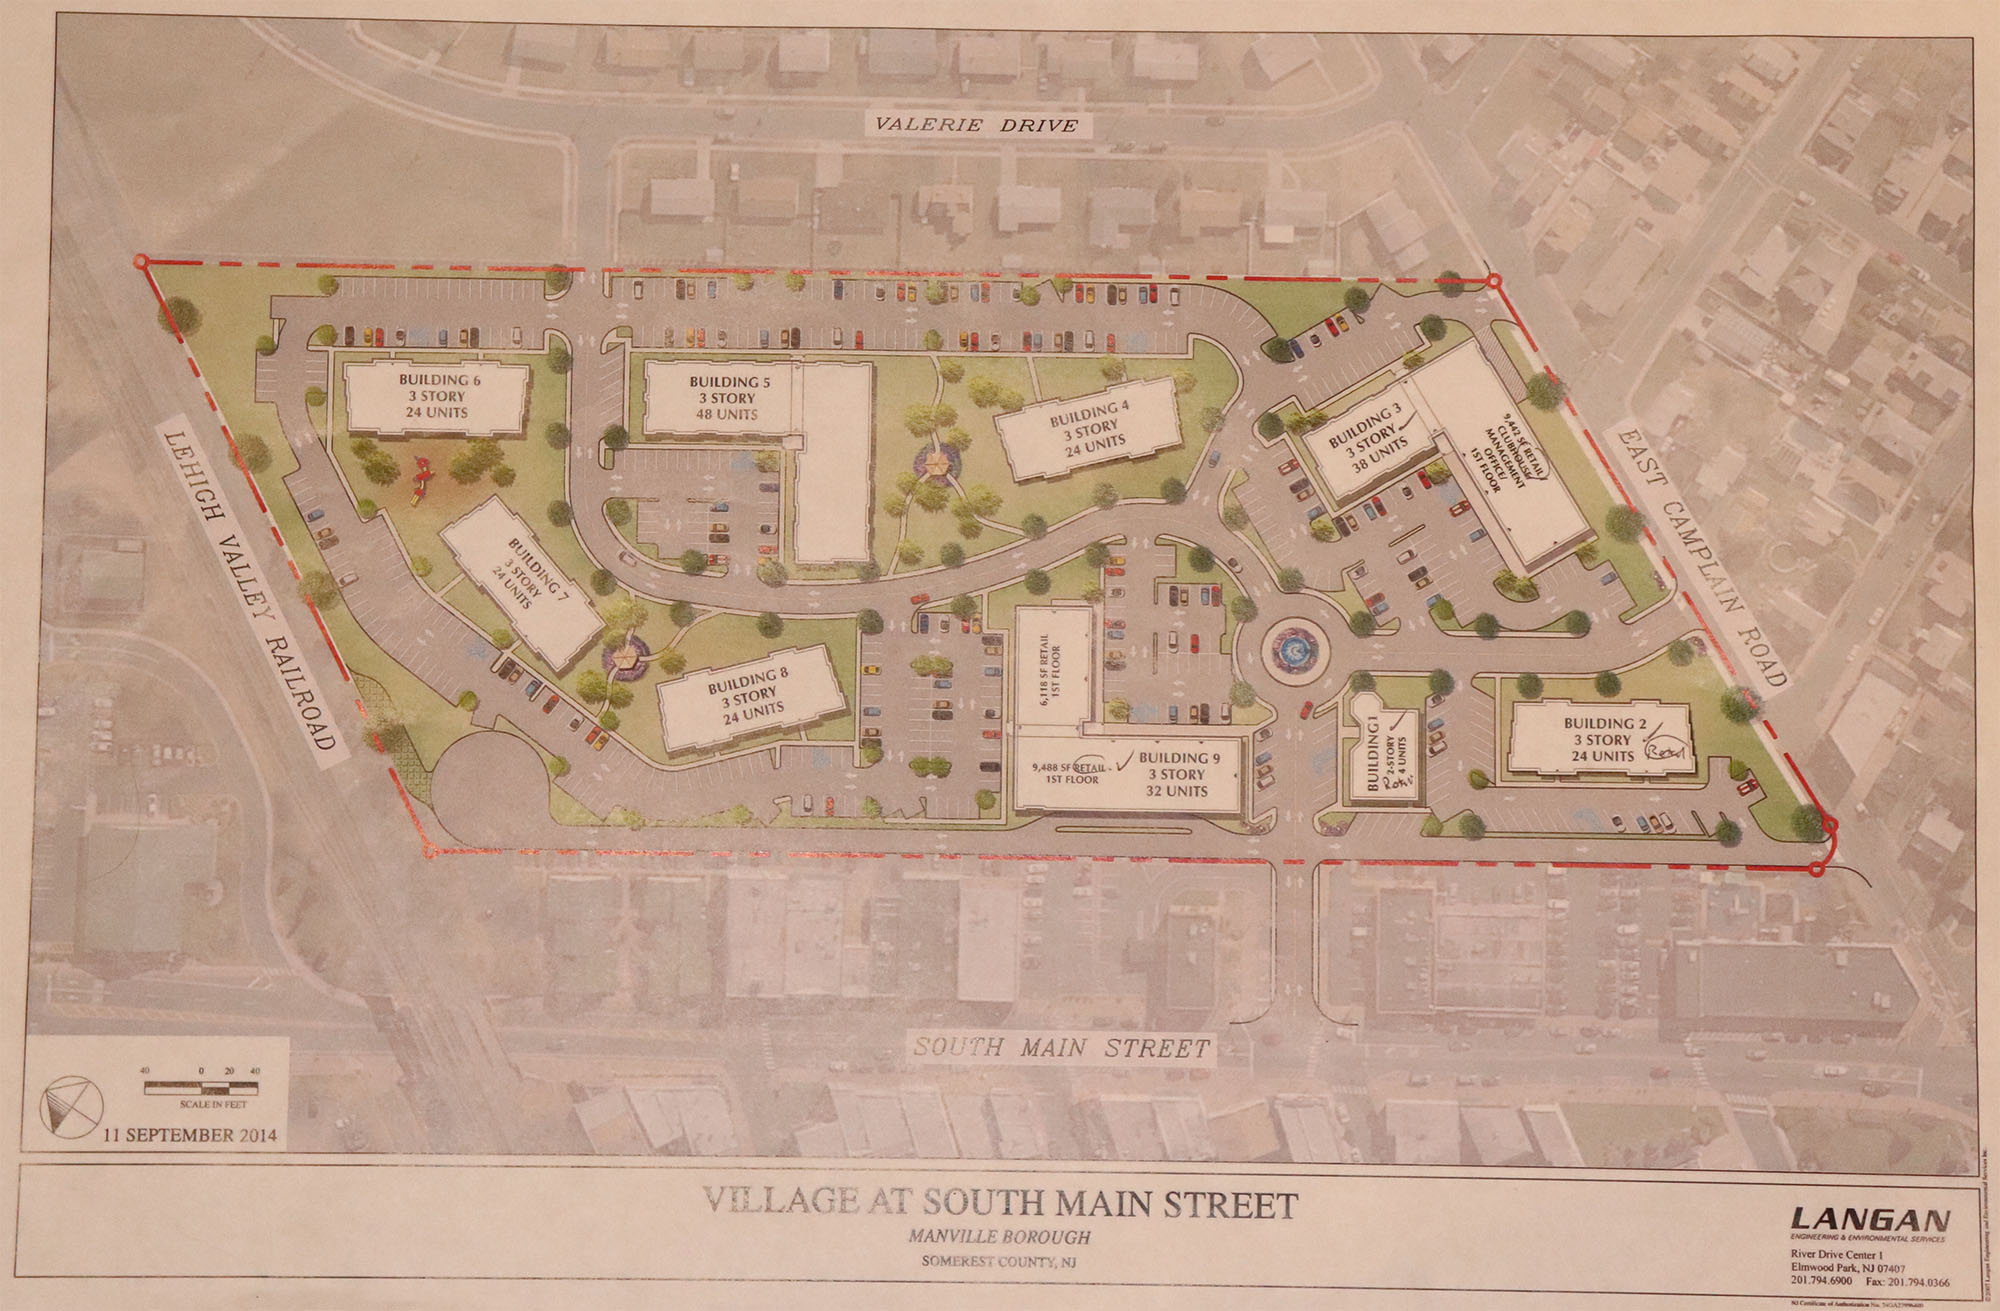 Rustic Mall Plan from Democrats in 2014